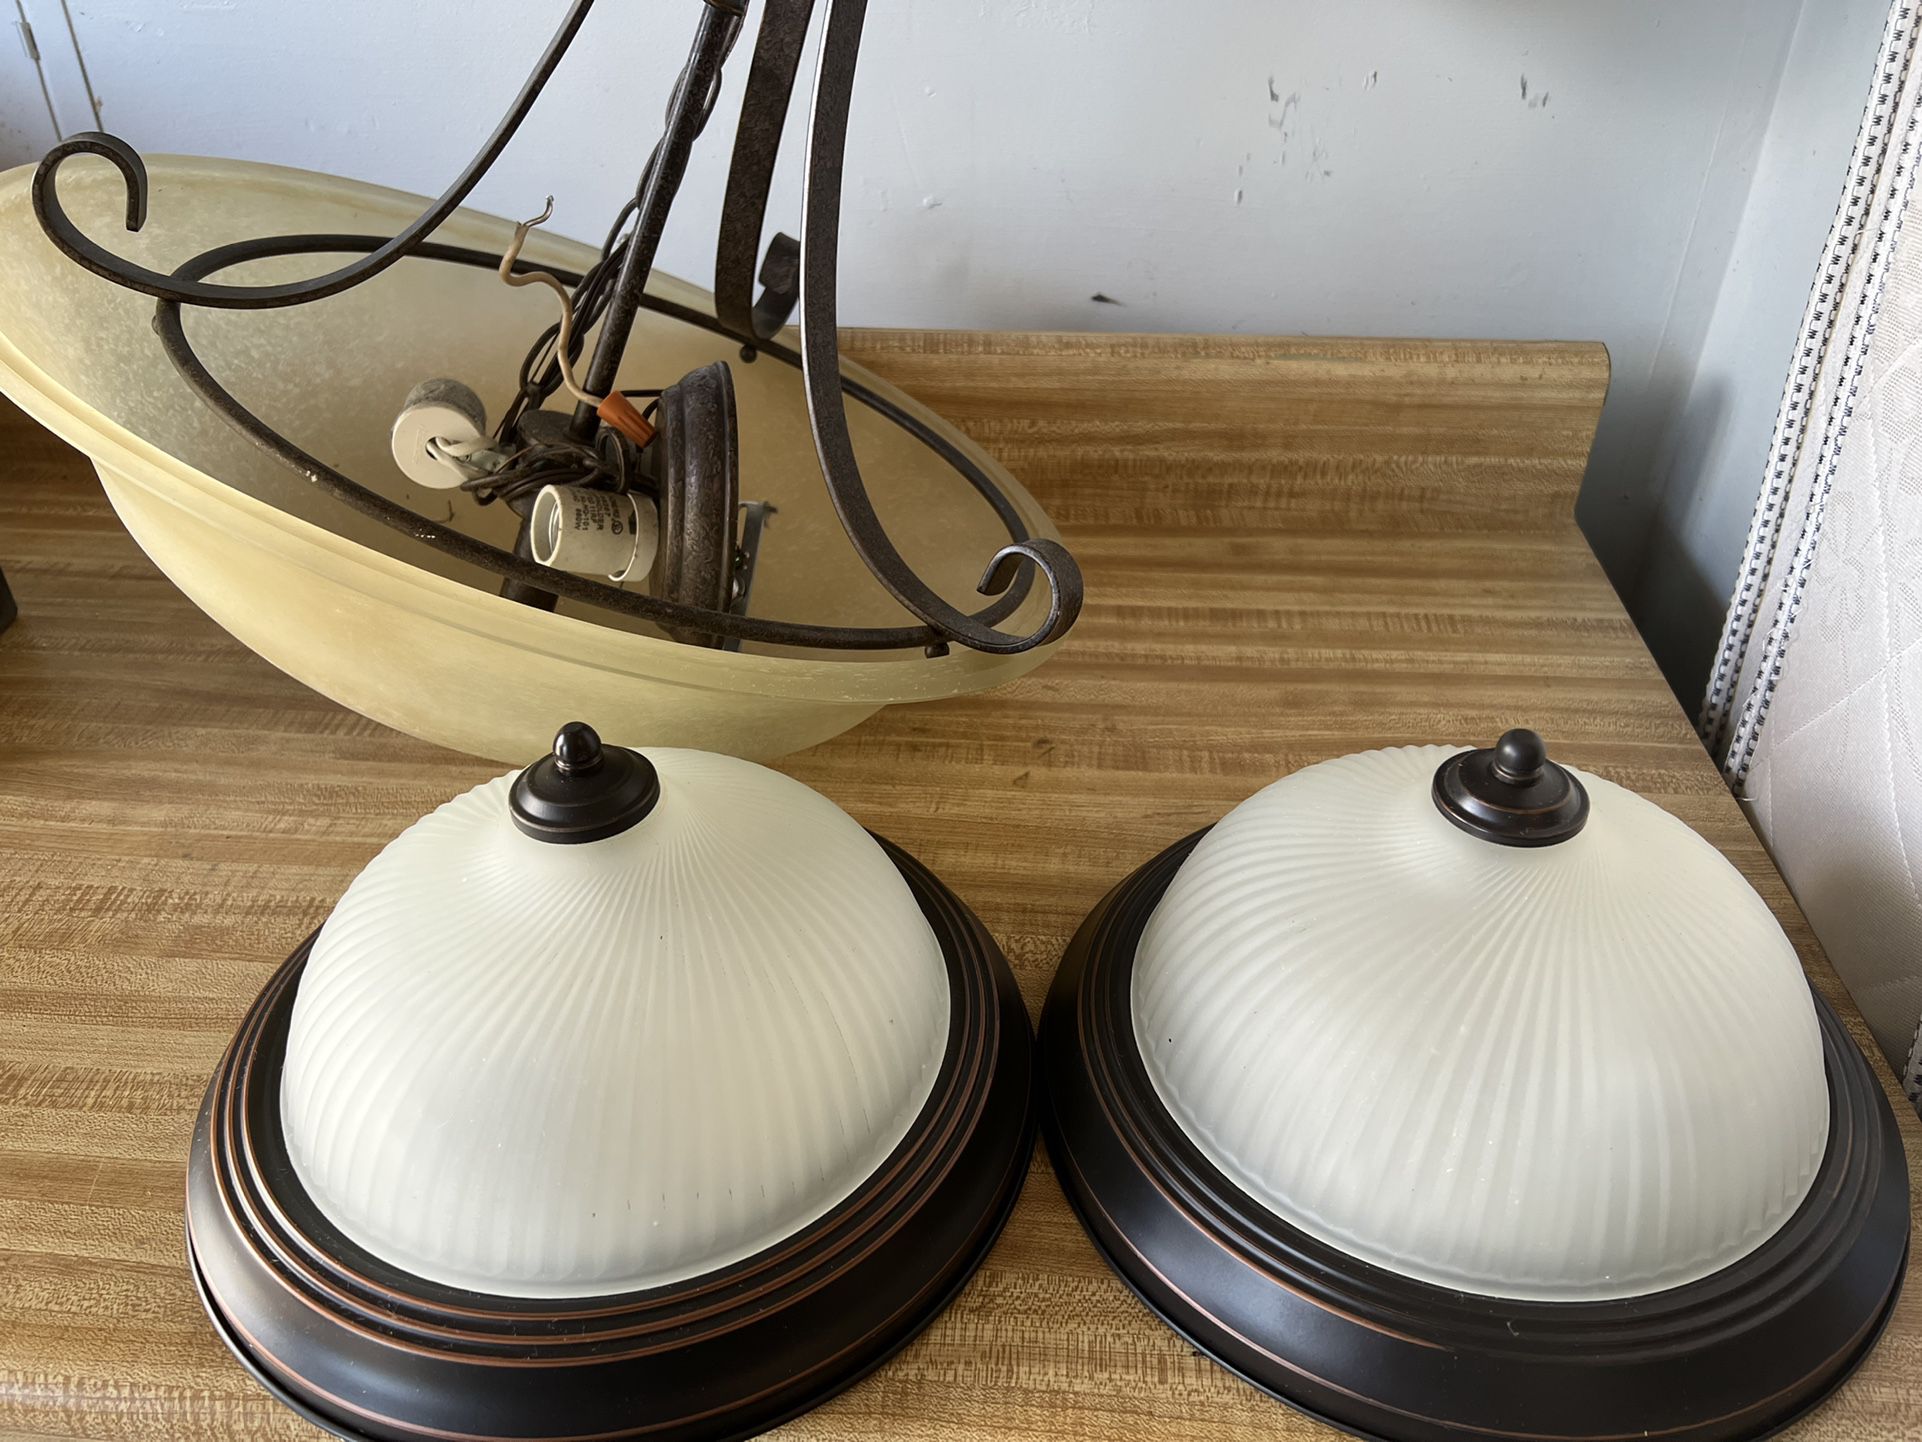 Pendant lamp and Flush Mount Lamps All For $20 / 3 Lamparas Por $20